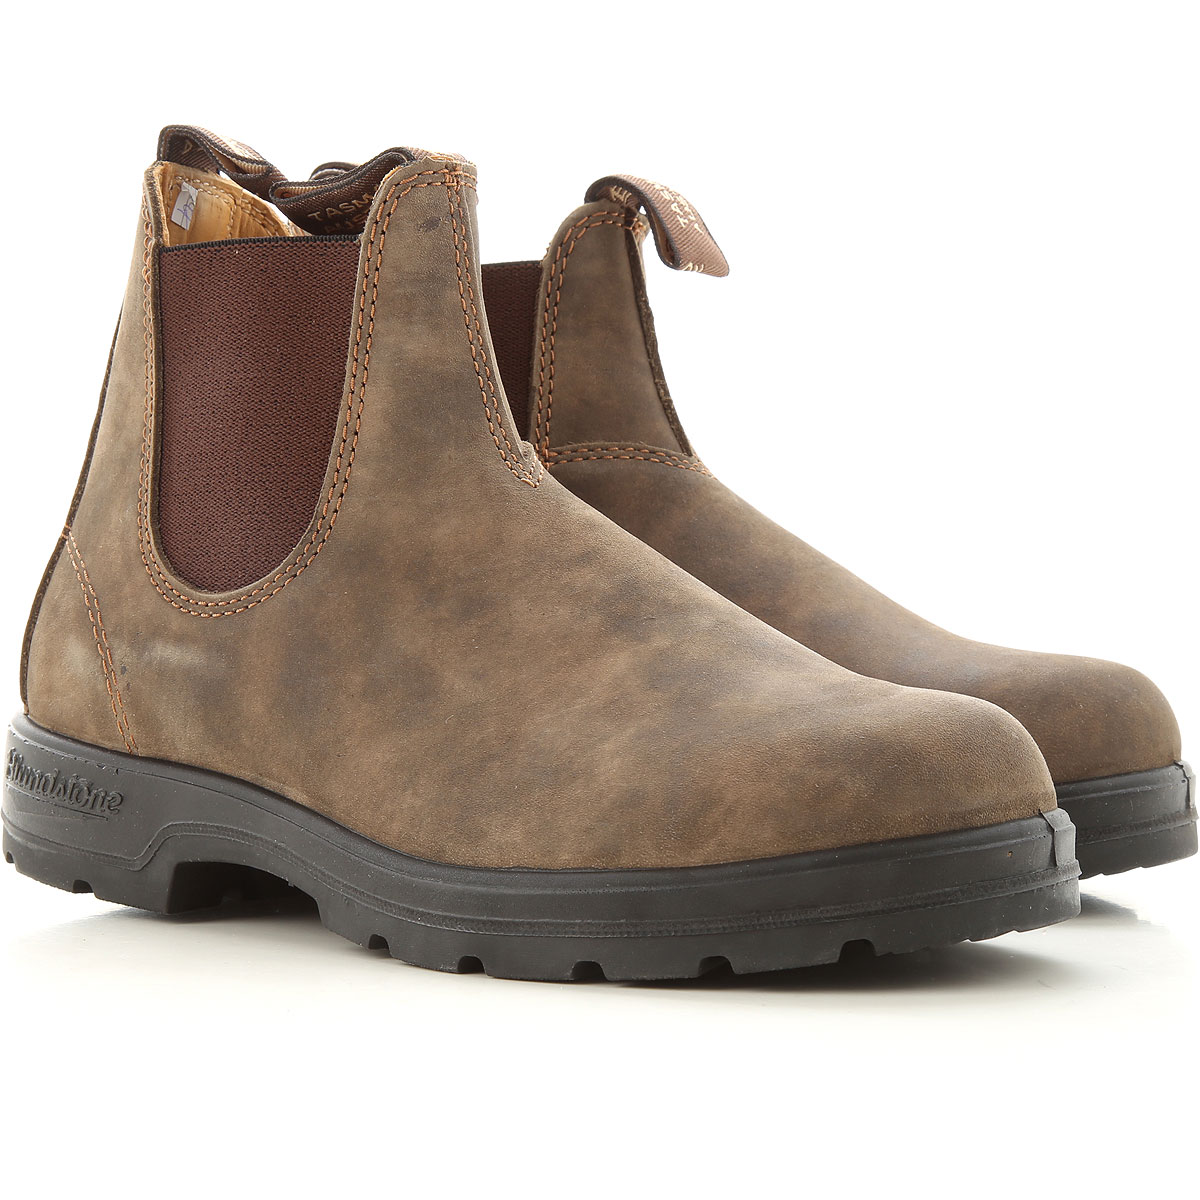 Womens Shoes Blundstone, Style code: 585-rustic-brown